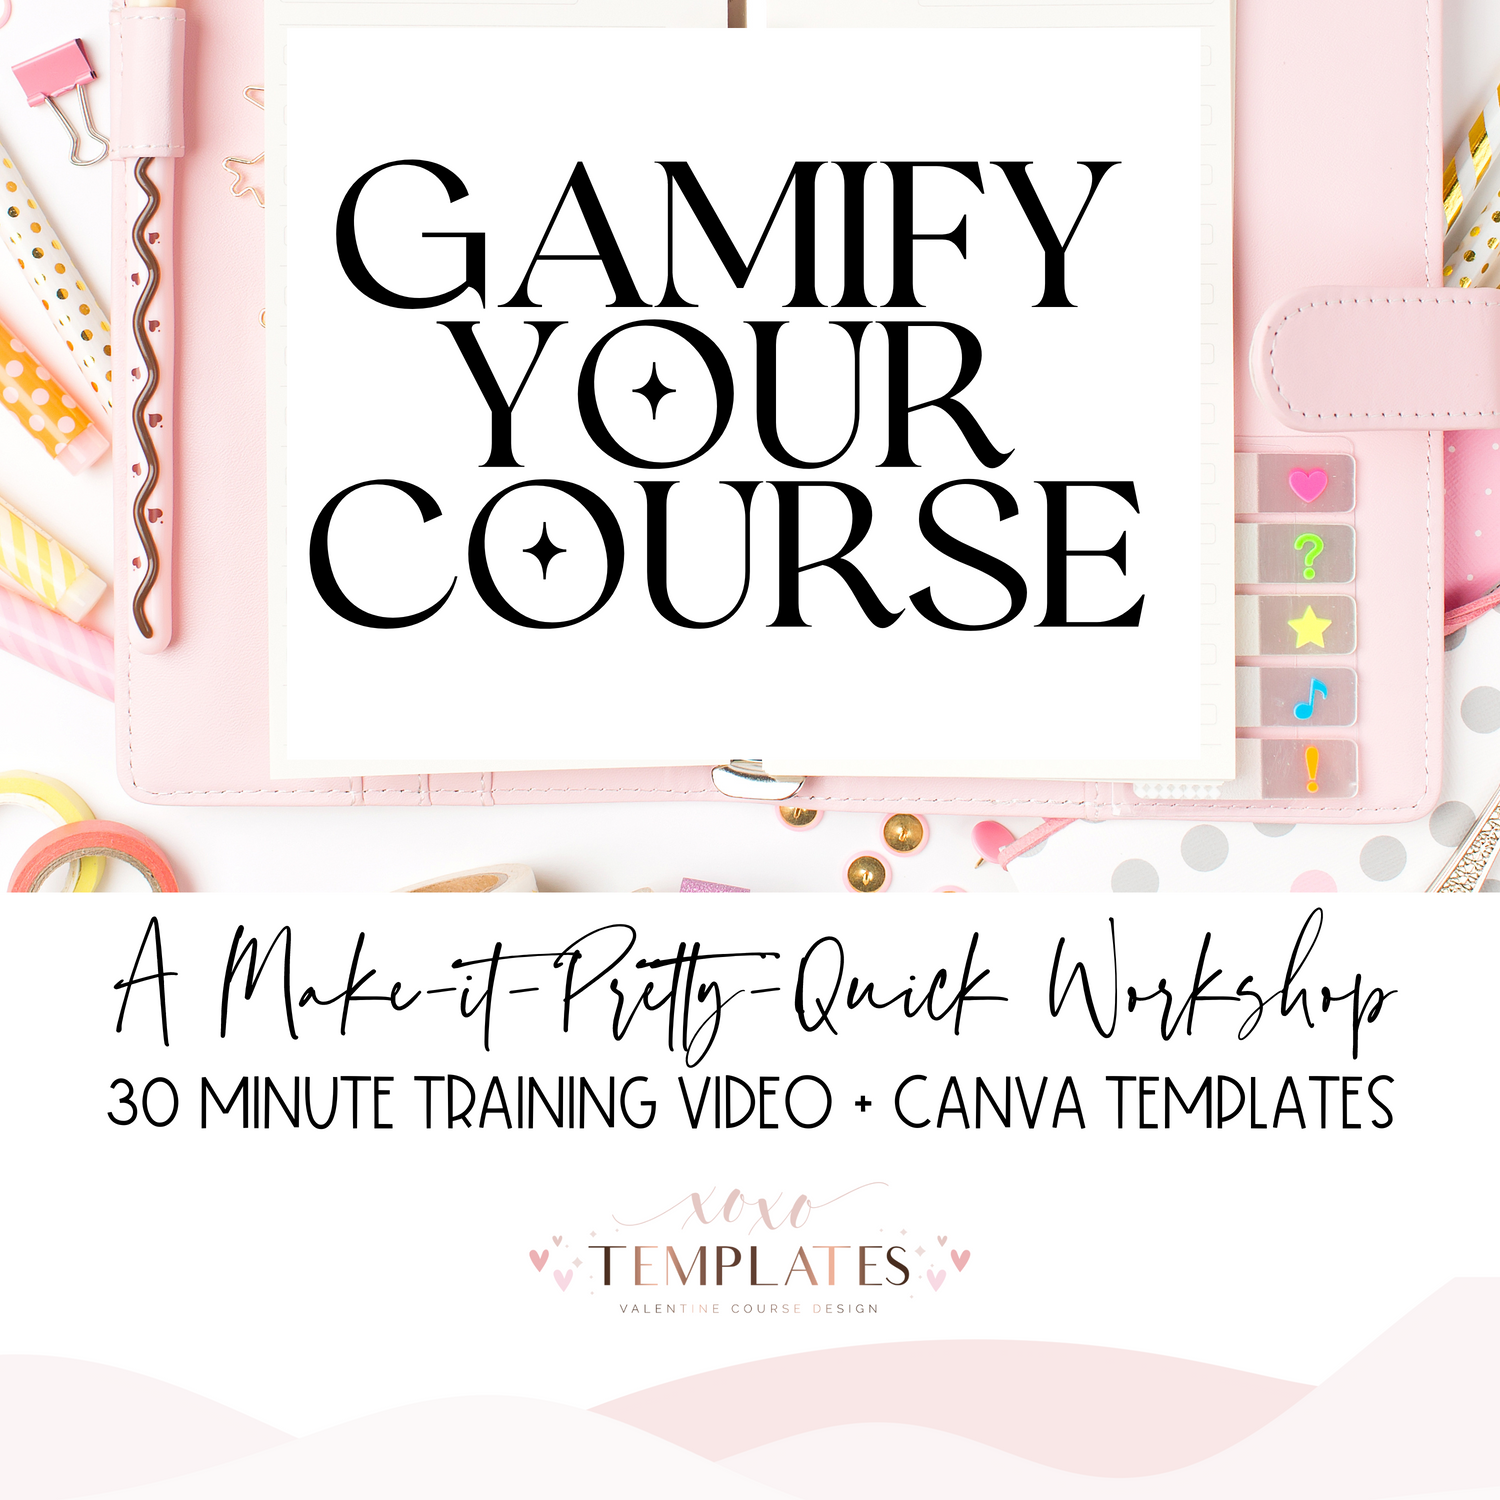 Gamify Your Course: A Make-it-Pretty-Quick Workshop